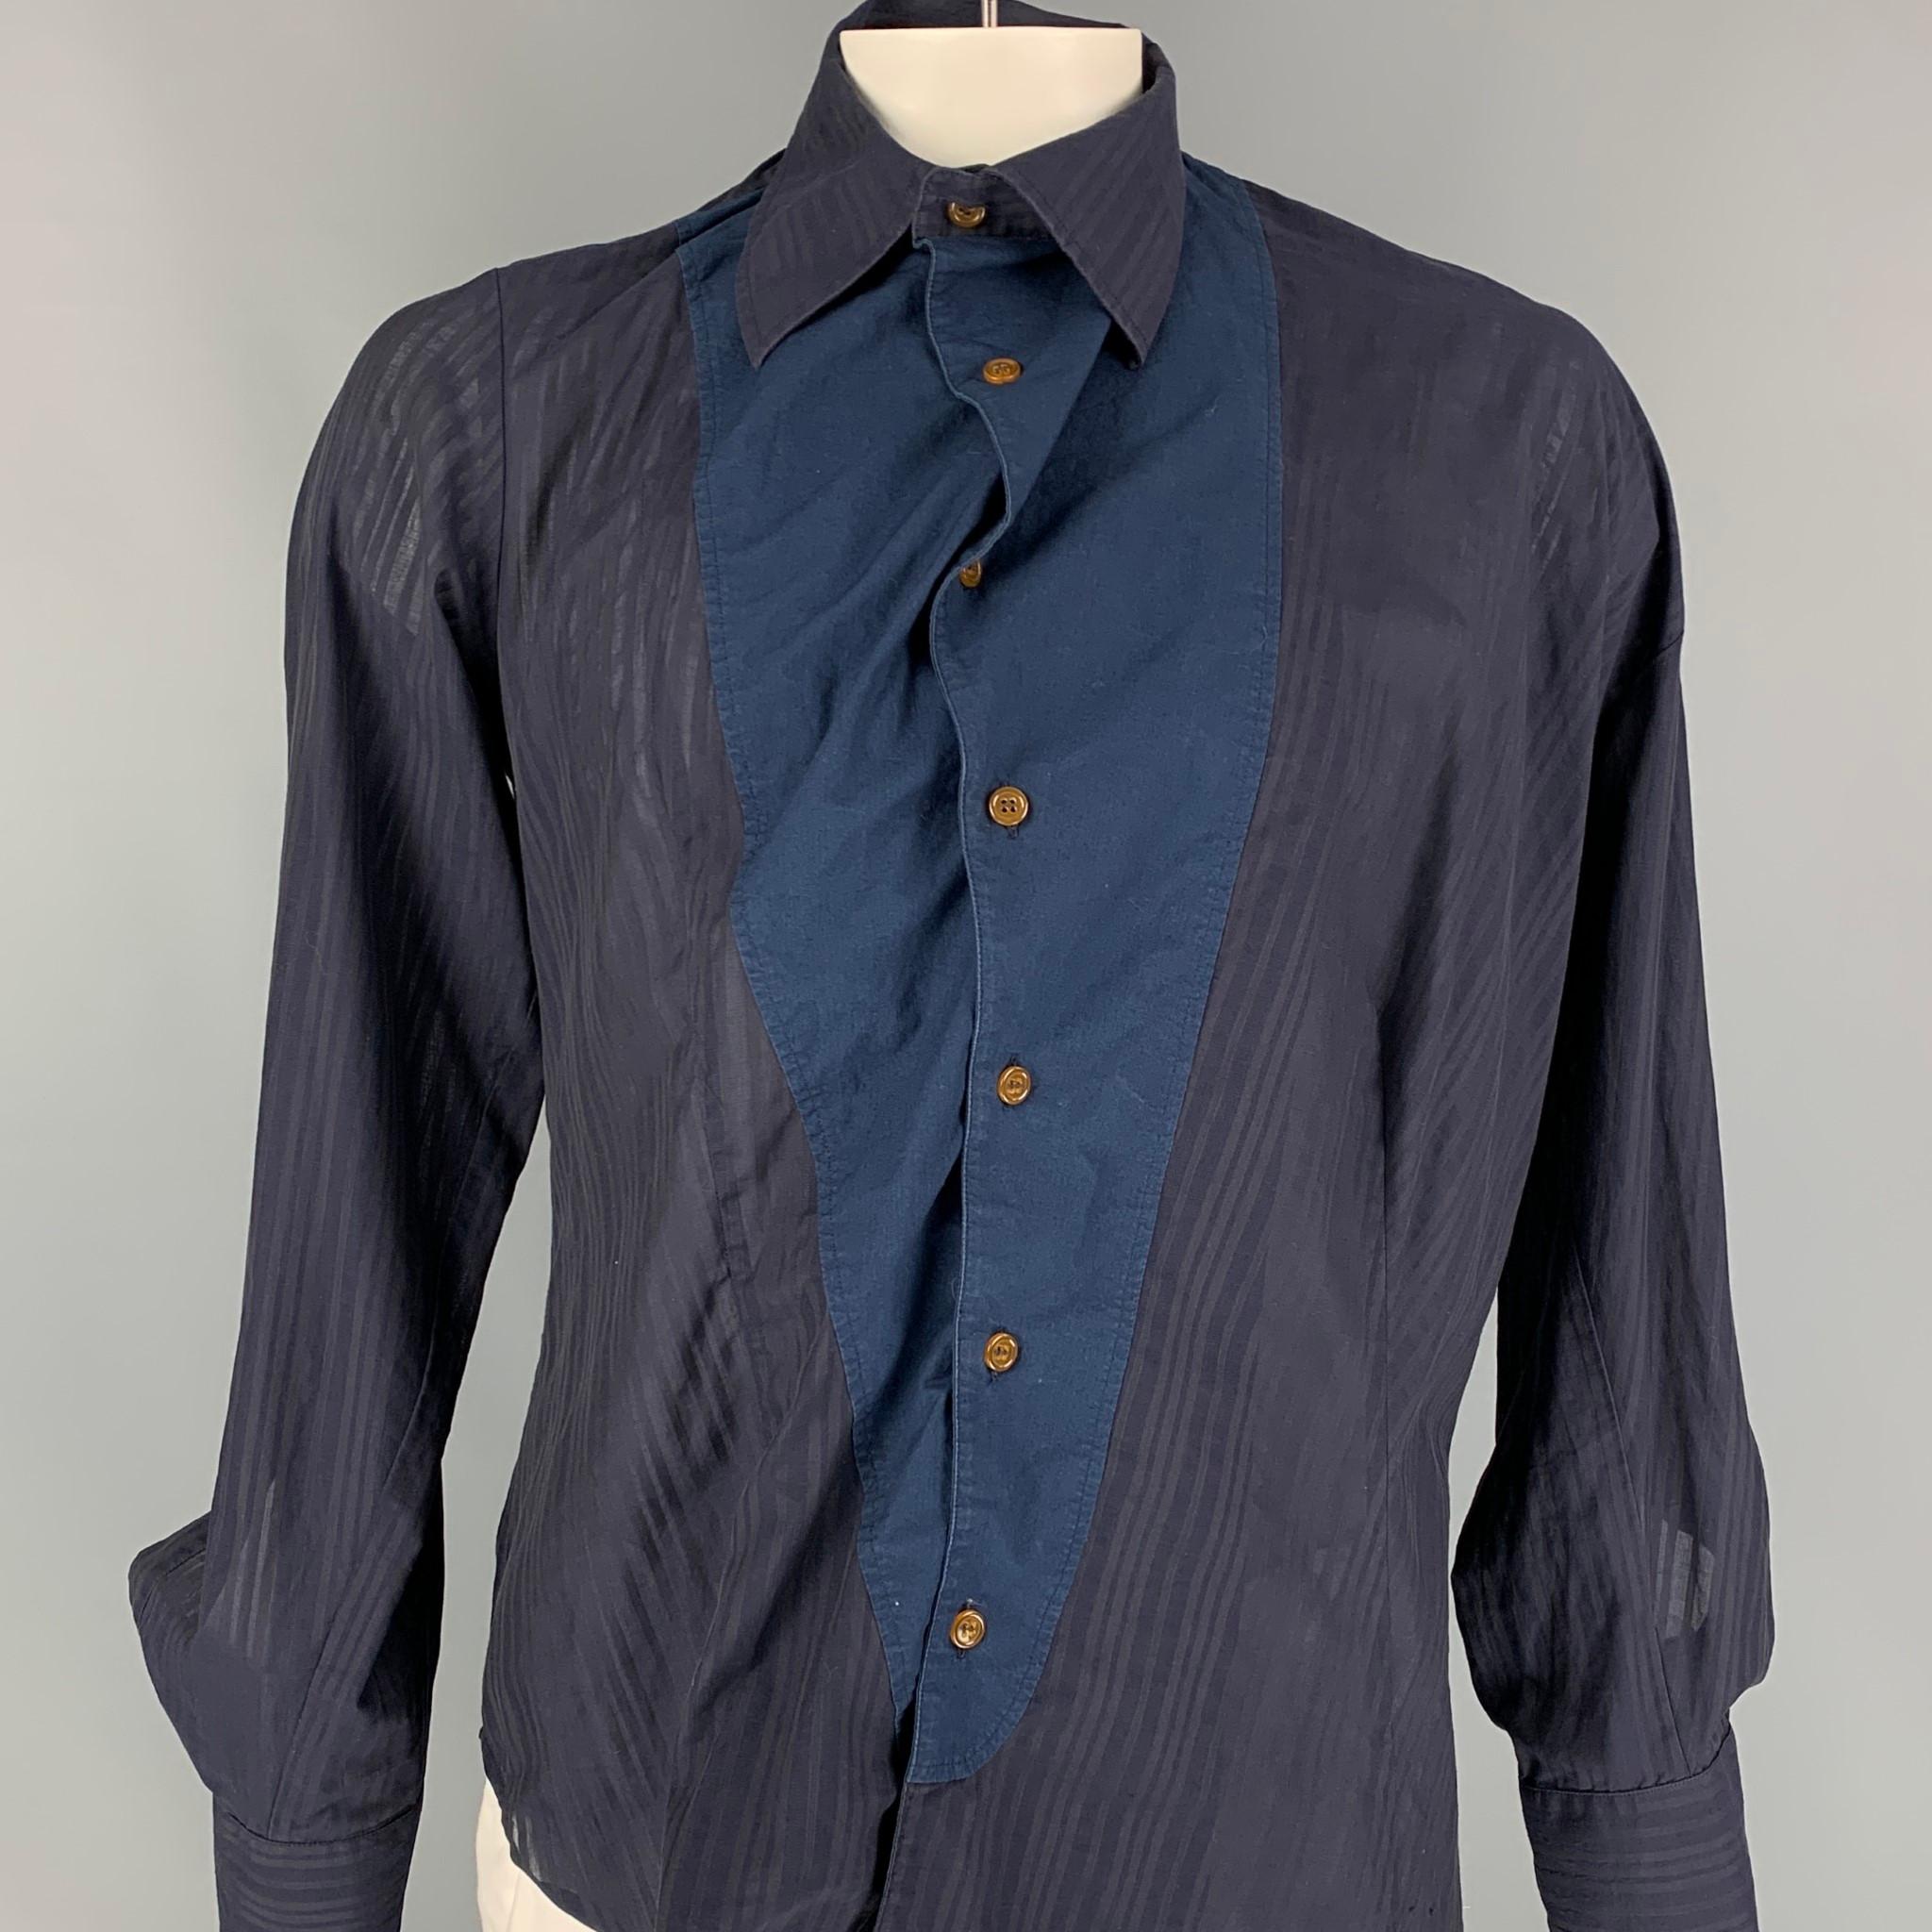 VIVIENNE WESTWOOD MAN long sleeve shirt comes in a navy & blue cotton featuring an asymmetrical style, spread collar, and a ruched buttoned closure. Made in Italy. 

Very Good Pre-Owned Condition.
Marked: III

Measurements:

Shoulder: 20 in.
Chest: